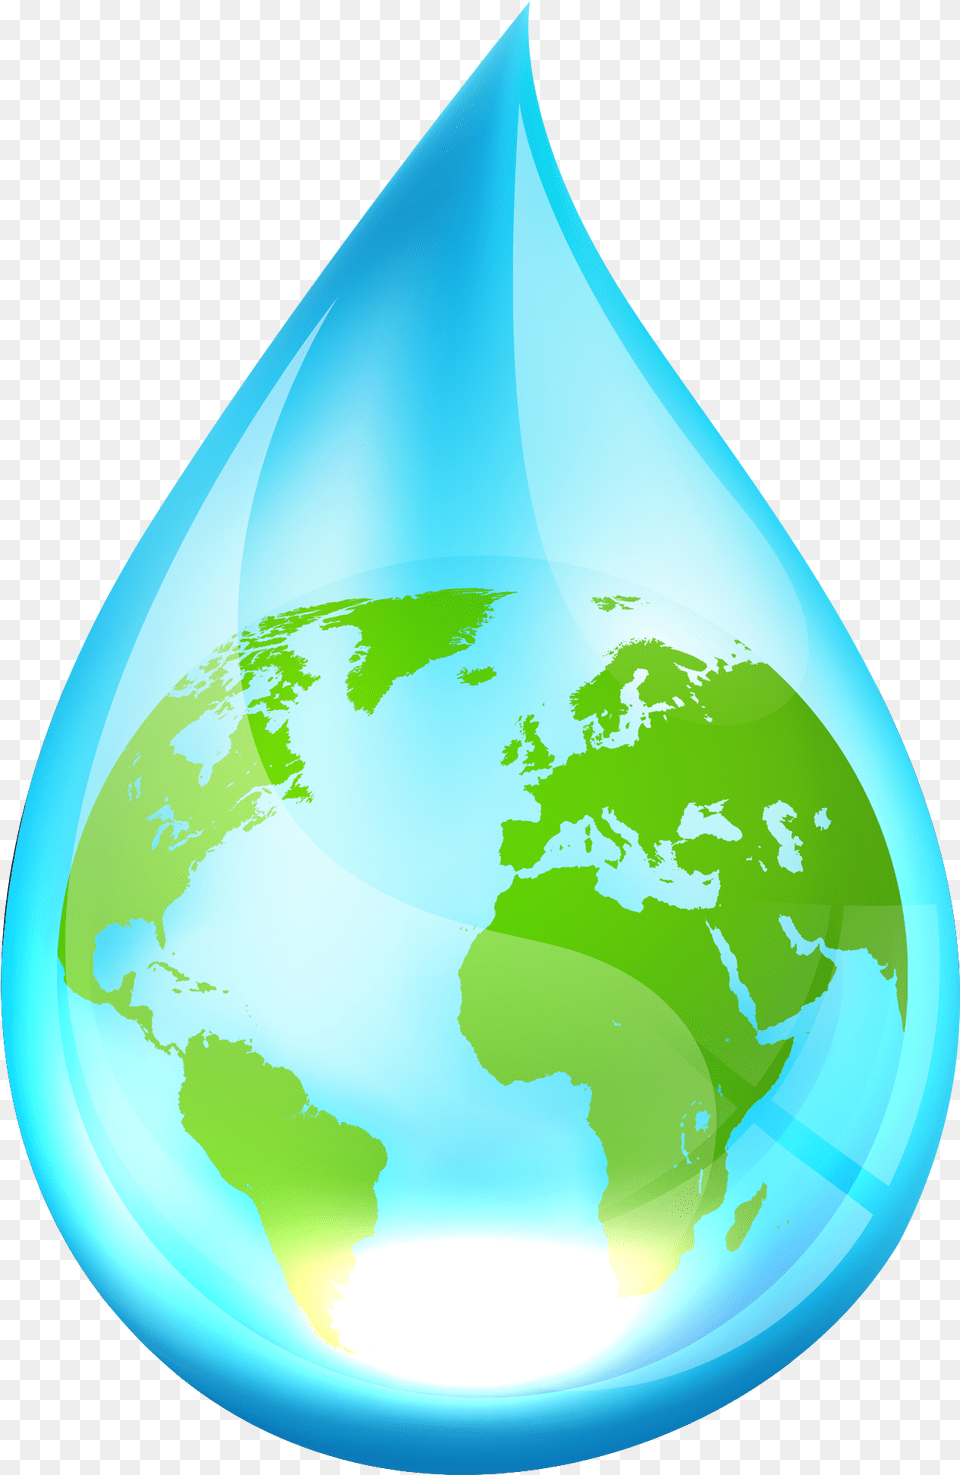 Download Earth Water Droplet With World Full Size World Map Wallpaper For Phone, Person, Astronomy, Outer Space Png Image